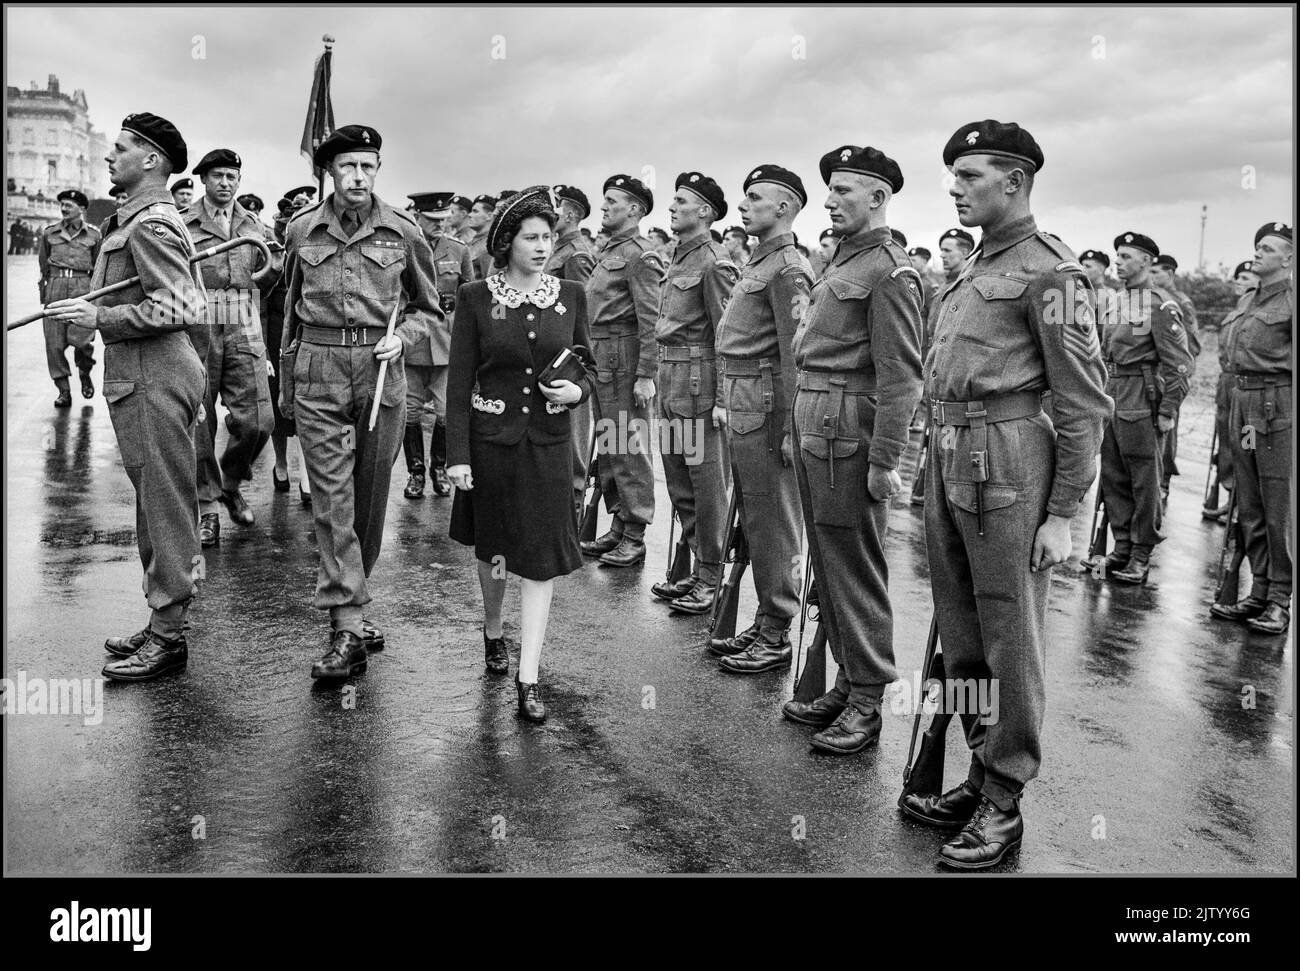 D-DAY WW2 PRINCESS ELIZABETH Allied Preparations For D-day The then Princess Elizabeth inspecting an honour guard during a Royal visit to 2nd (Armoured) Battalion Grenadier Guards, 5th Guards Armoured Brigade, Guards Armoured Division, at Hove, 17 May 1944. 17 May 1944 (Second World War) World War II Taken by War Office official photographer, Malindine E G (Captain) Stock Photo